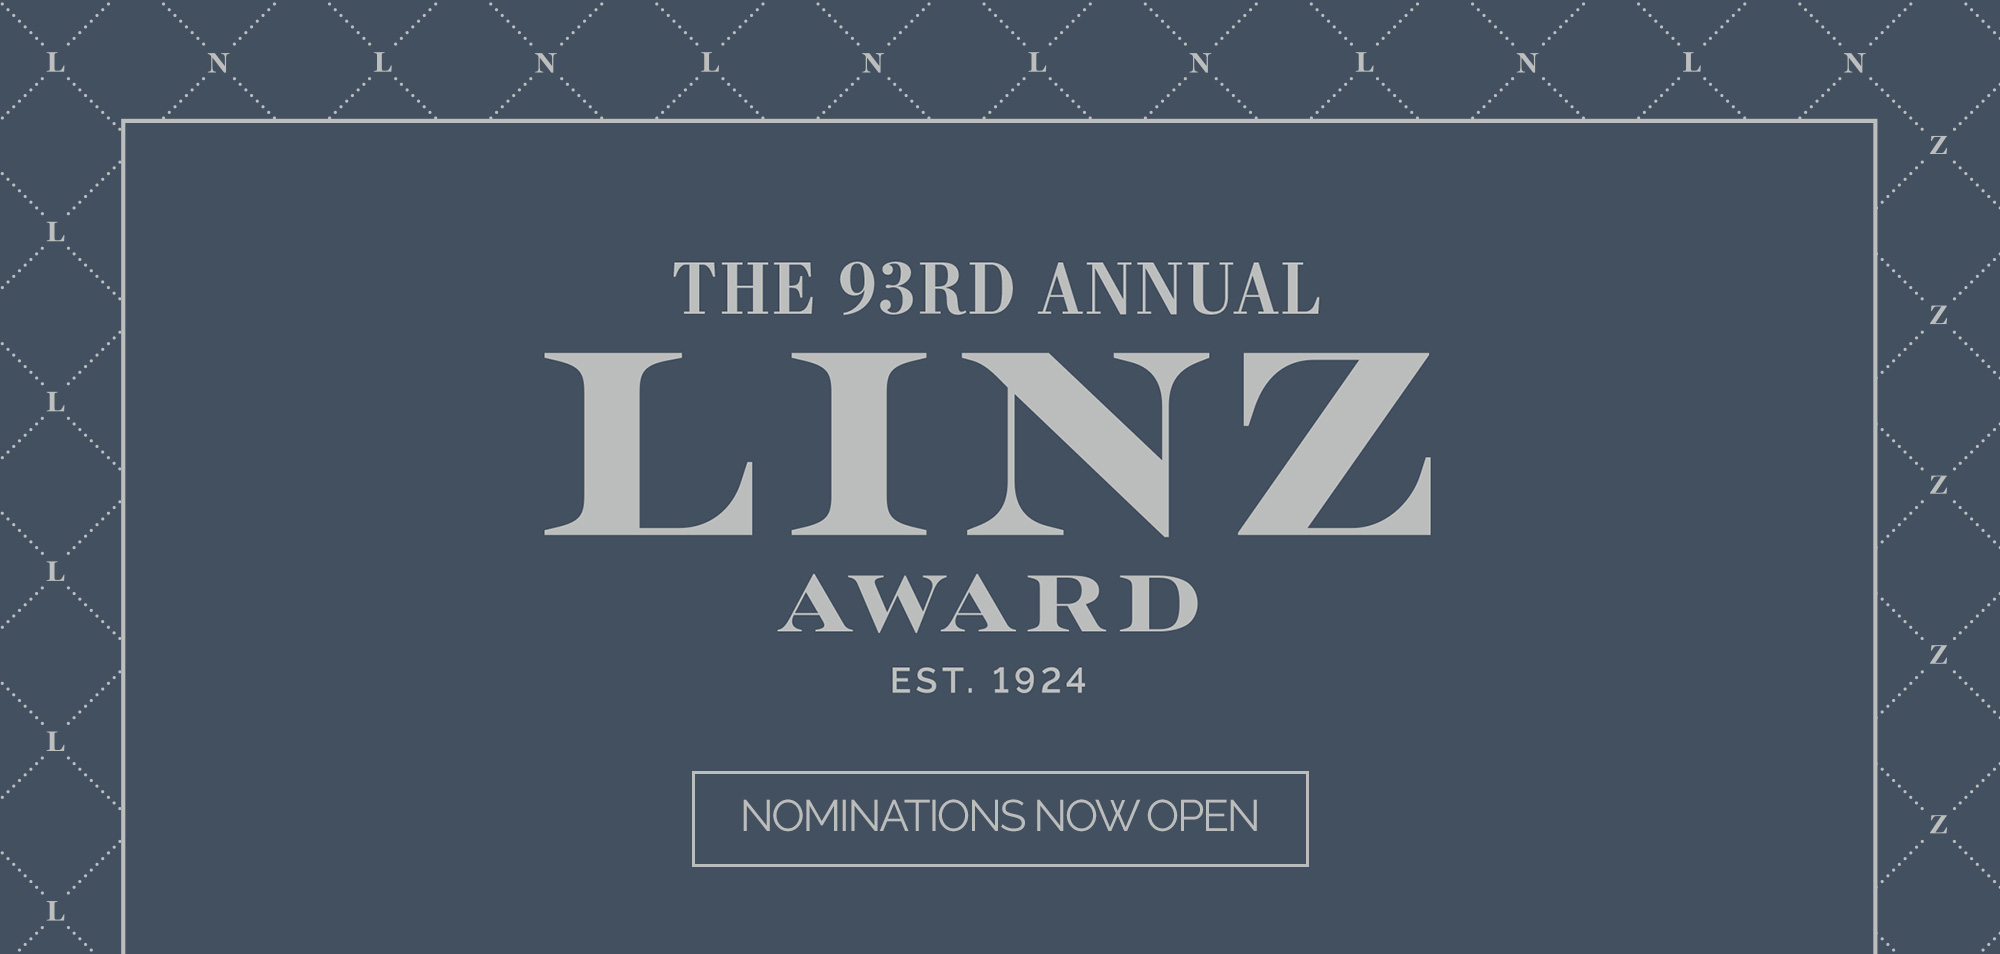 The 93rd Annual Linz Award - Nominations Now Open